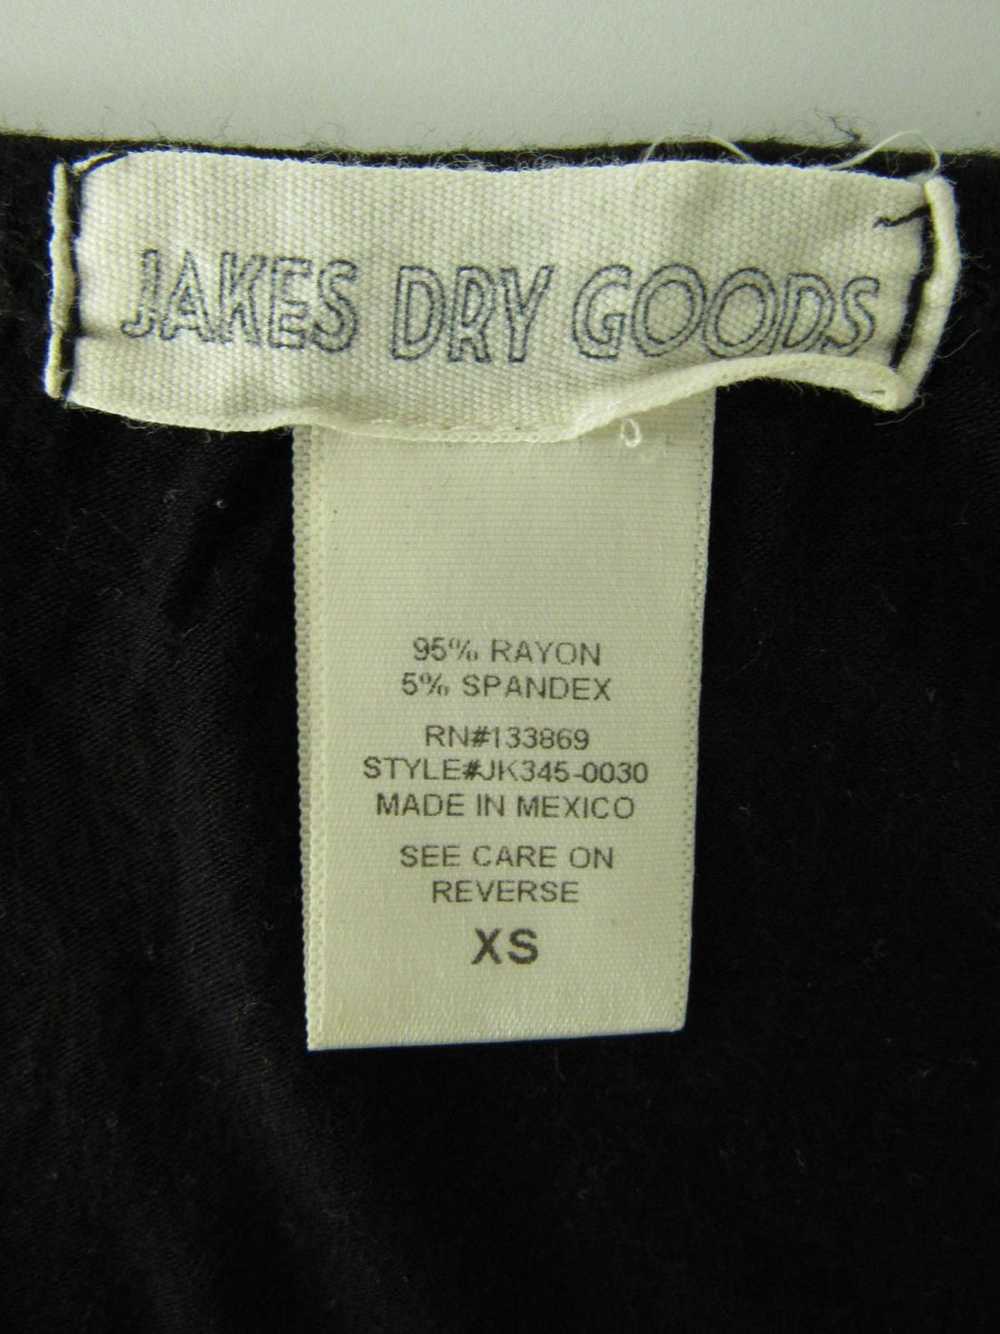 Jakes Dry Goods Tank Top - image 3